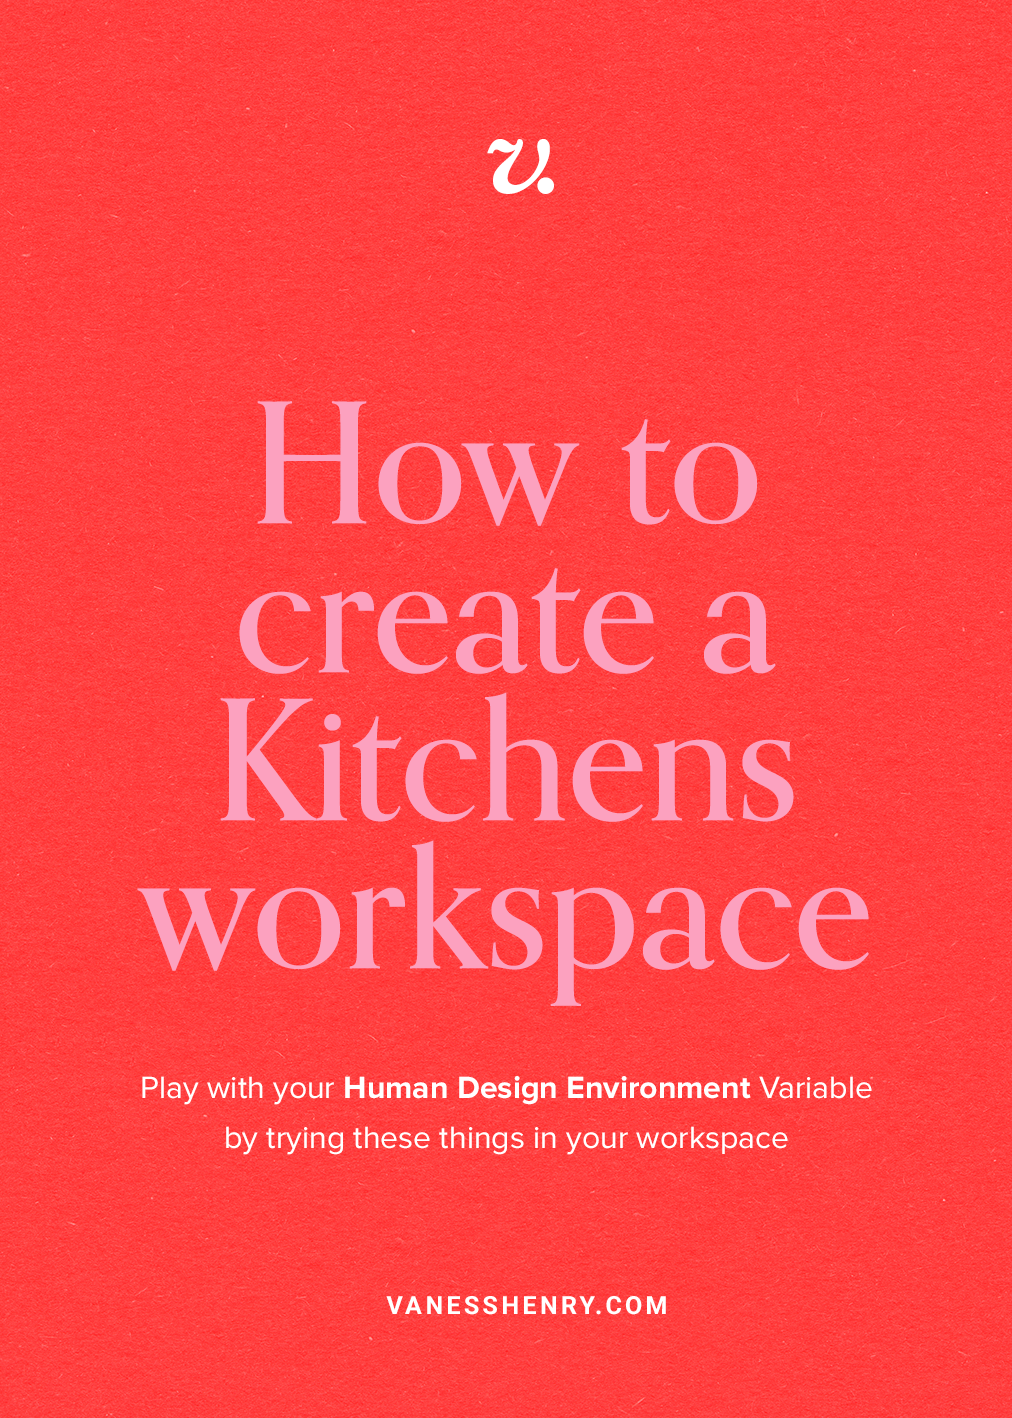 Create+a+Kitchens+Workspace,+Human+Design+_+vanesshenry.png